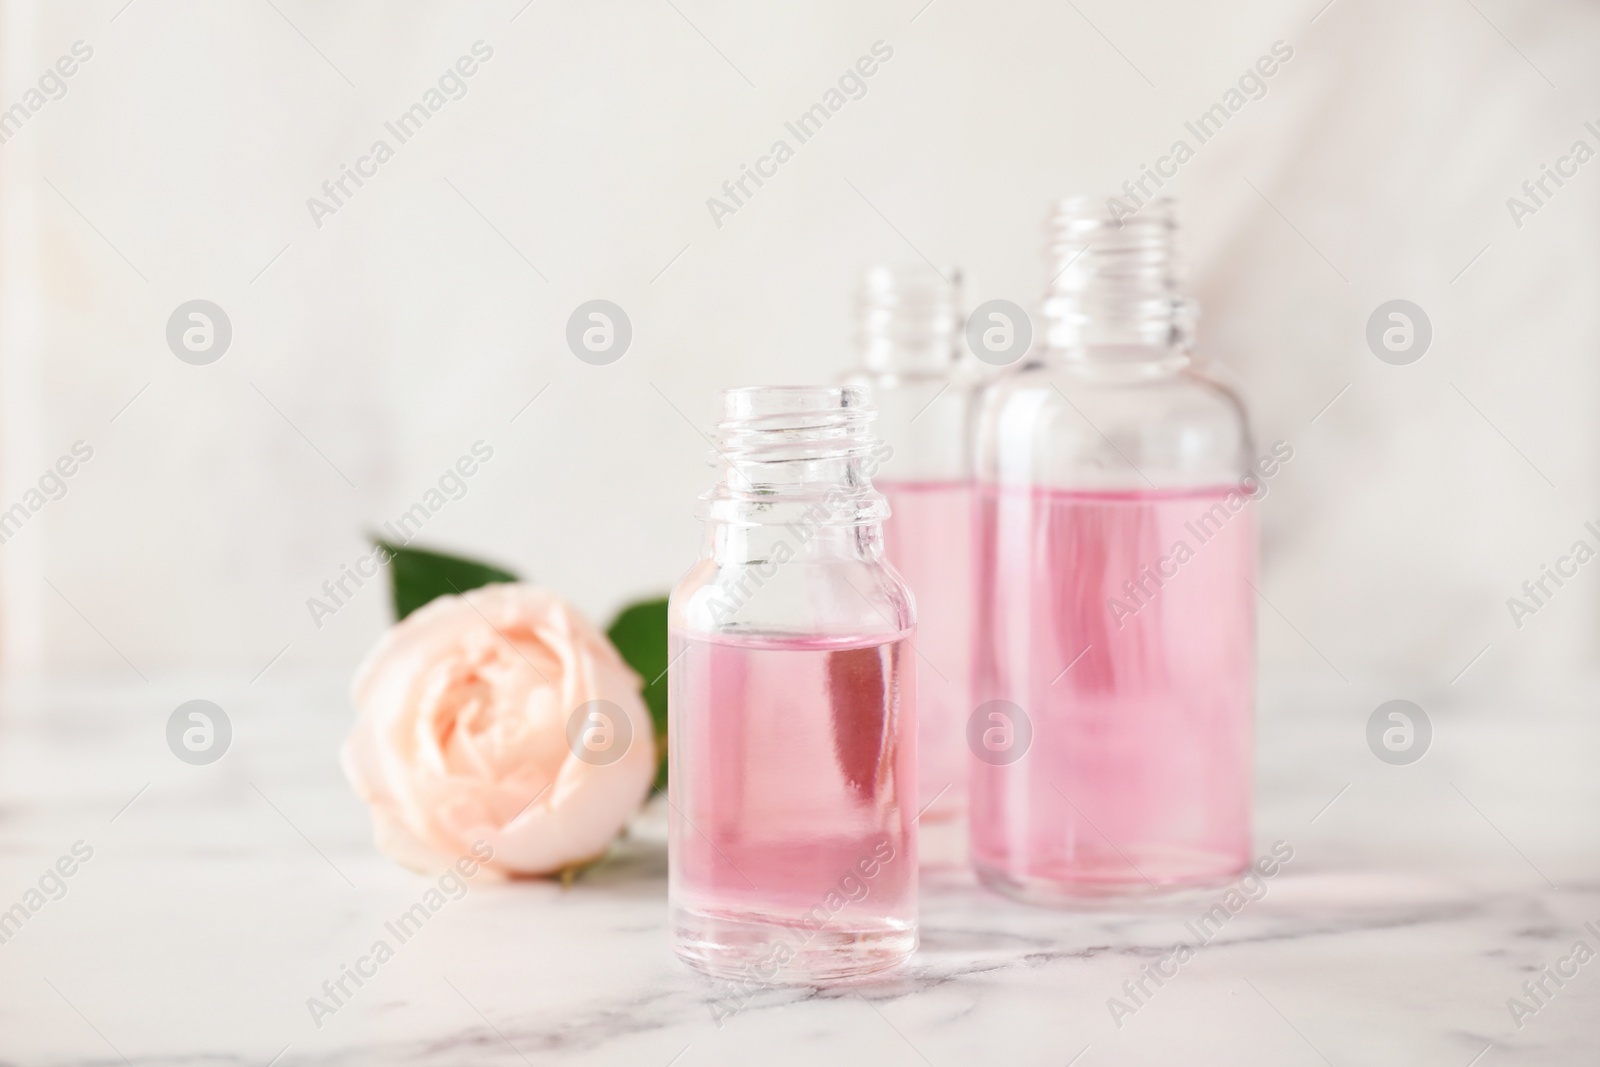 Photo of Bottles of essential oil and rose on marble table